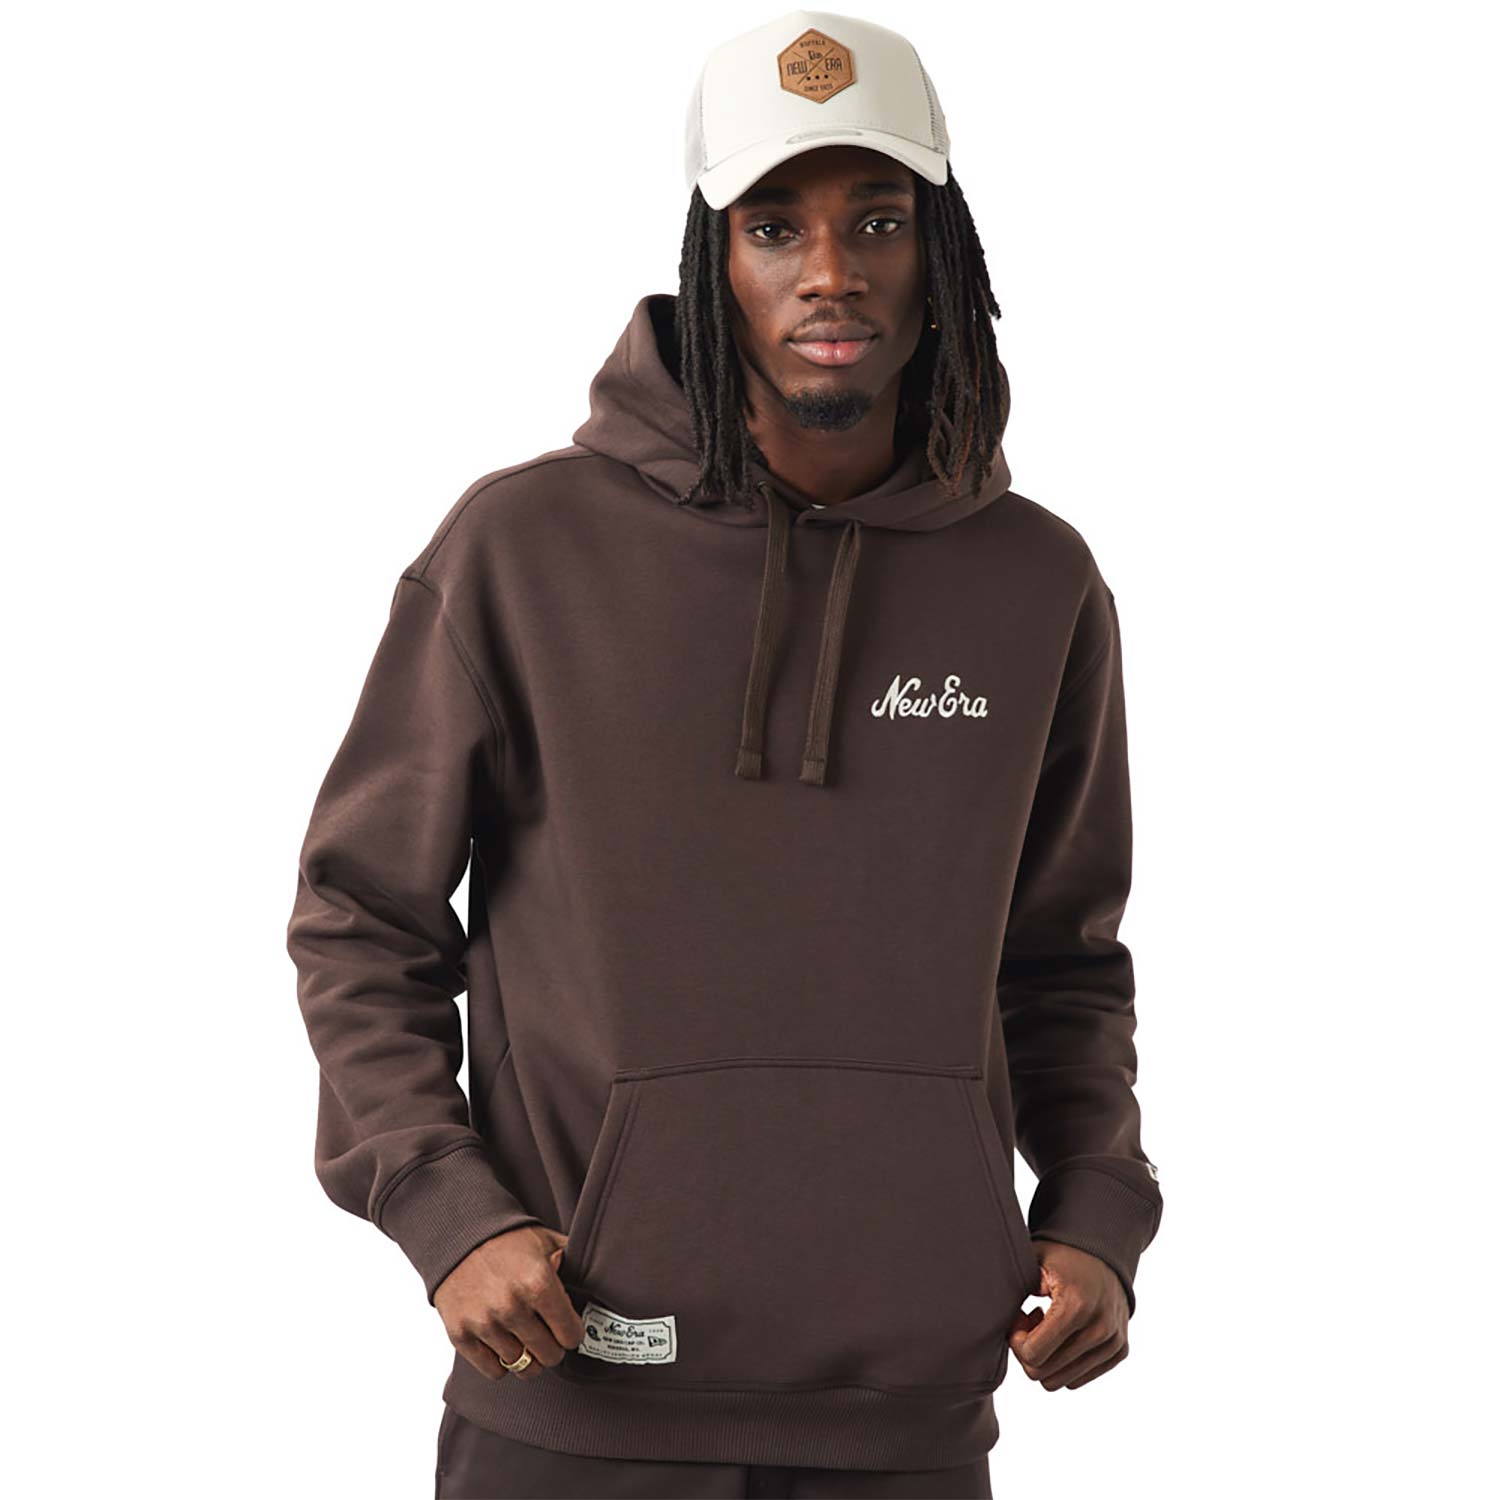 Hooded sweatshirt with oversized colour-matched camouflage embroidery